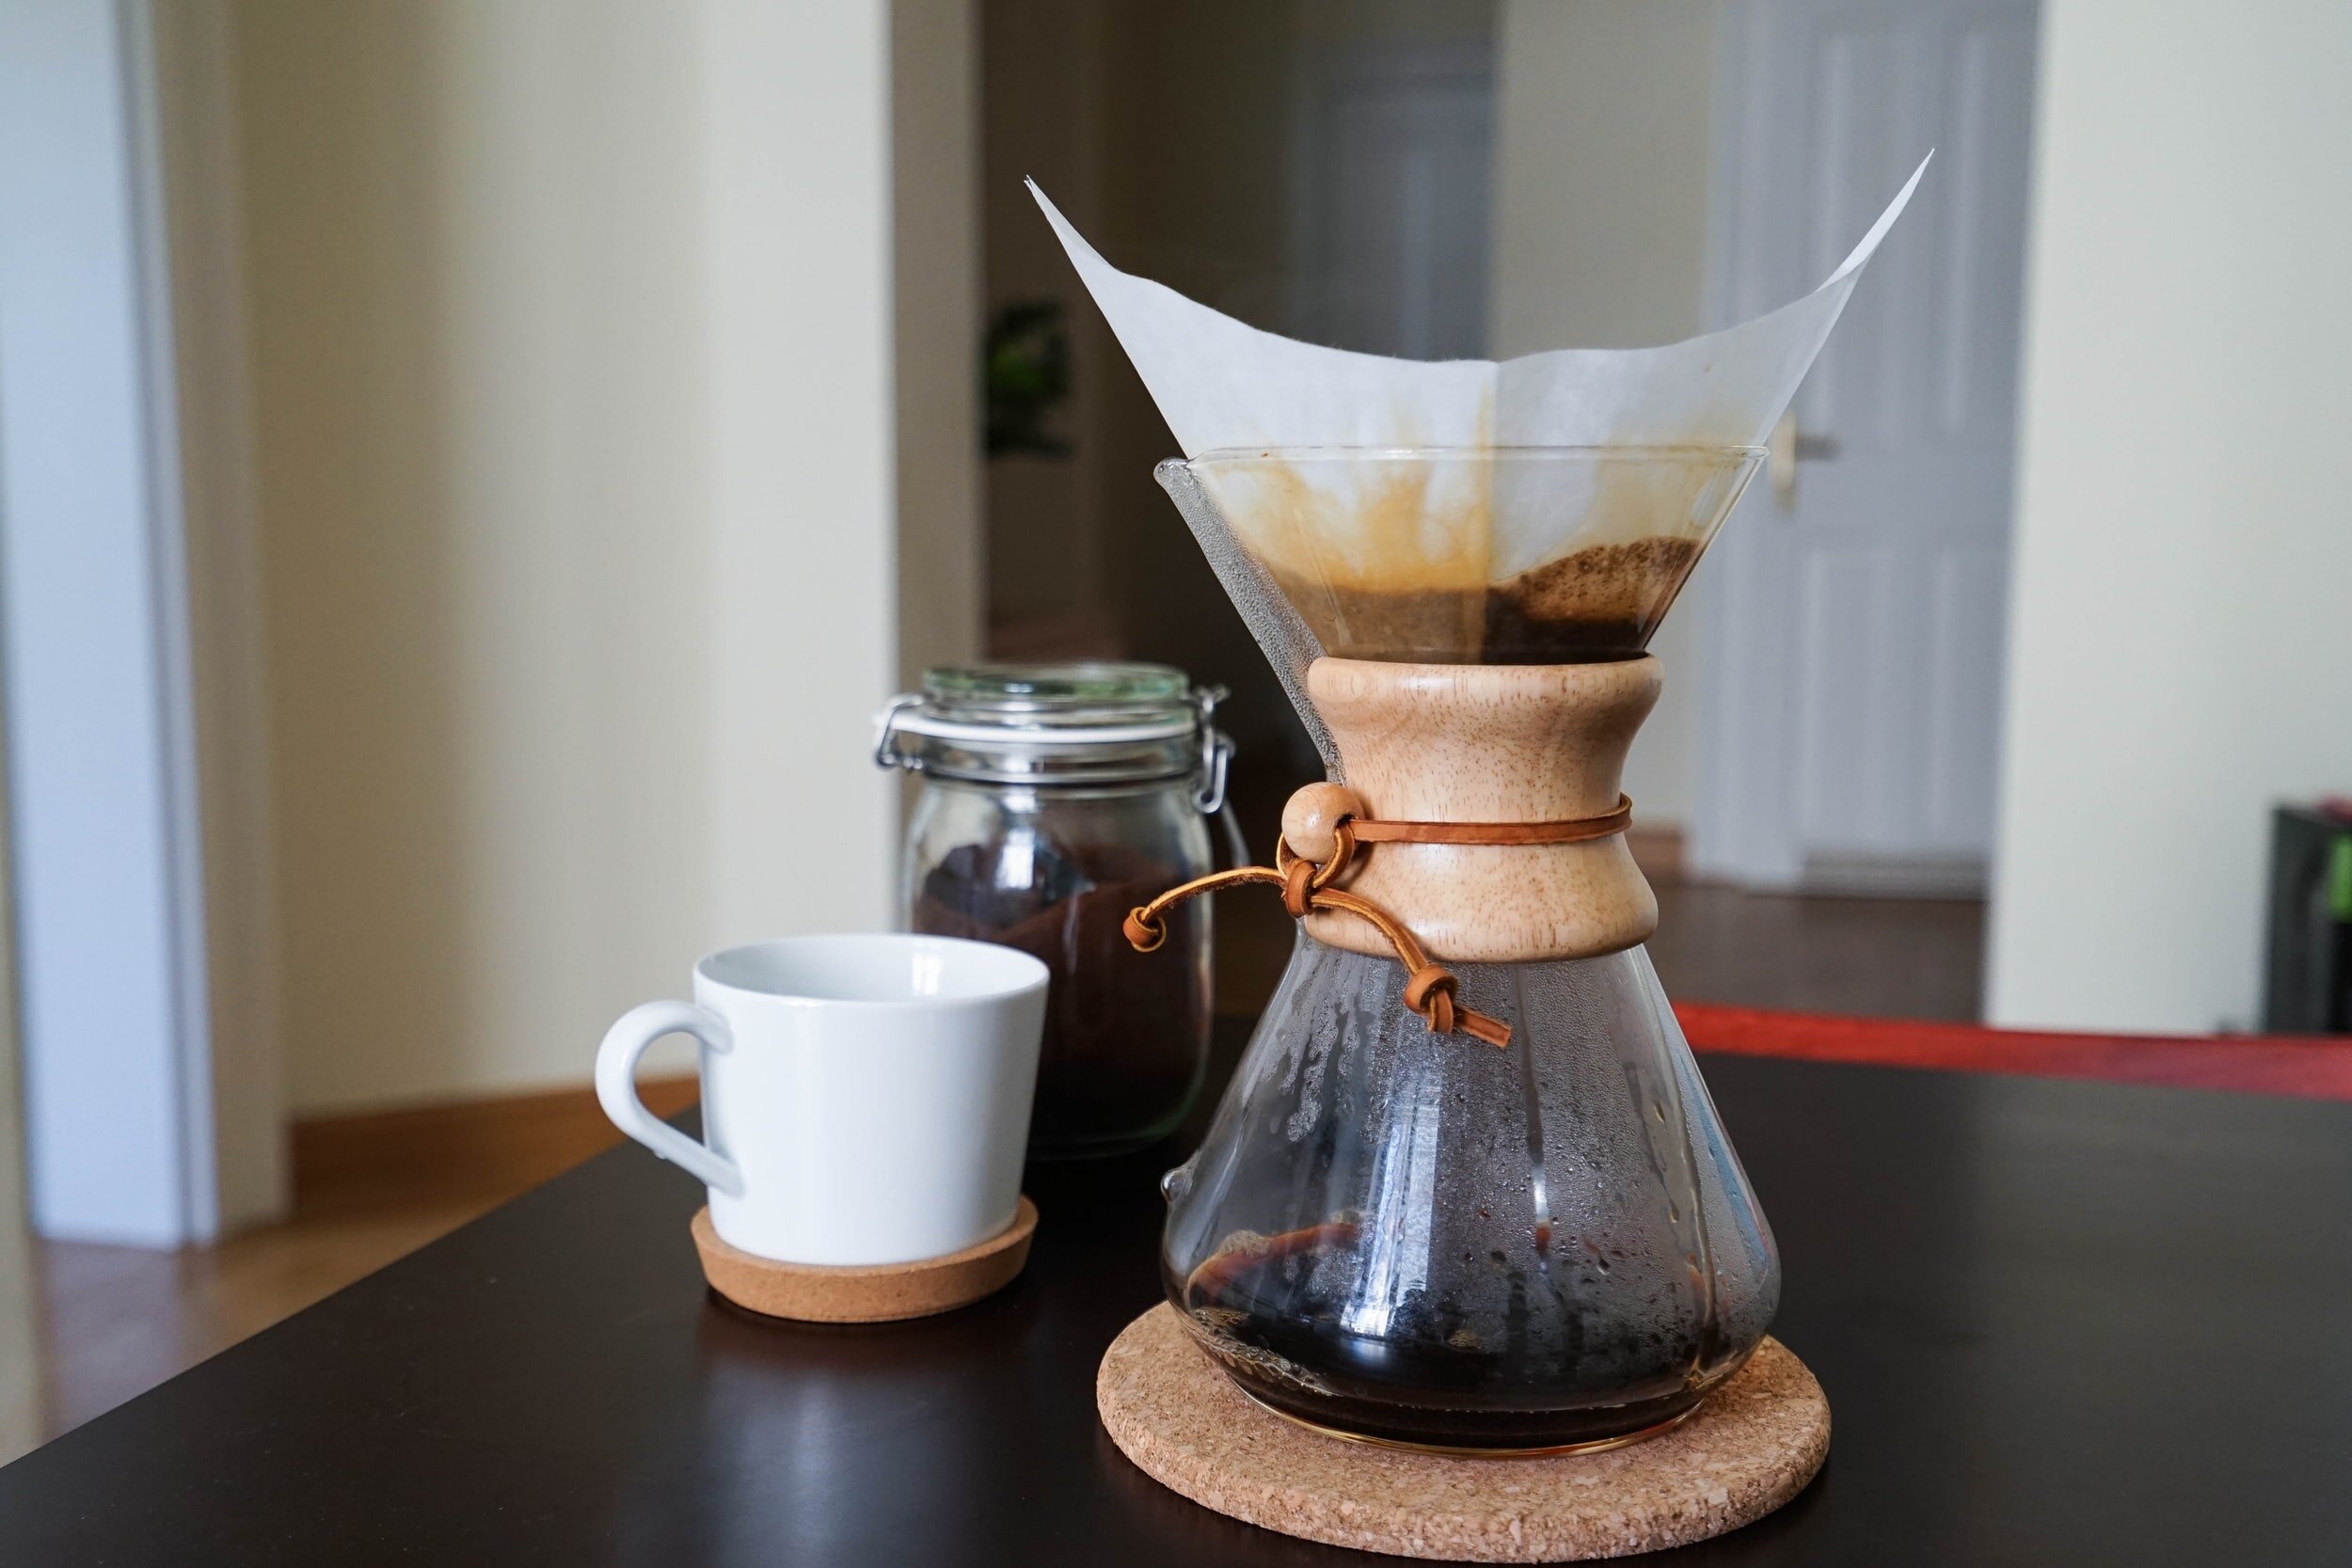 How to Make Chemex Pour Over Coffee